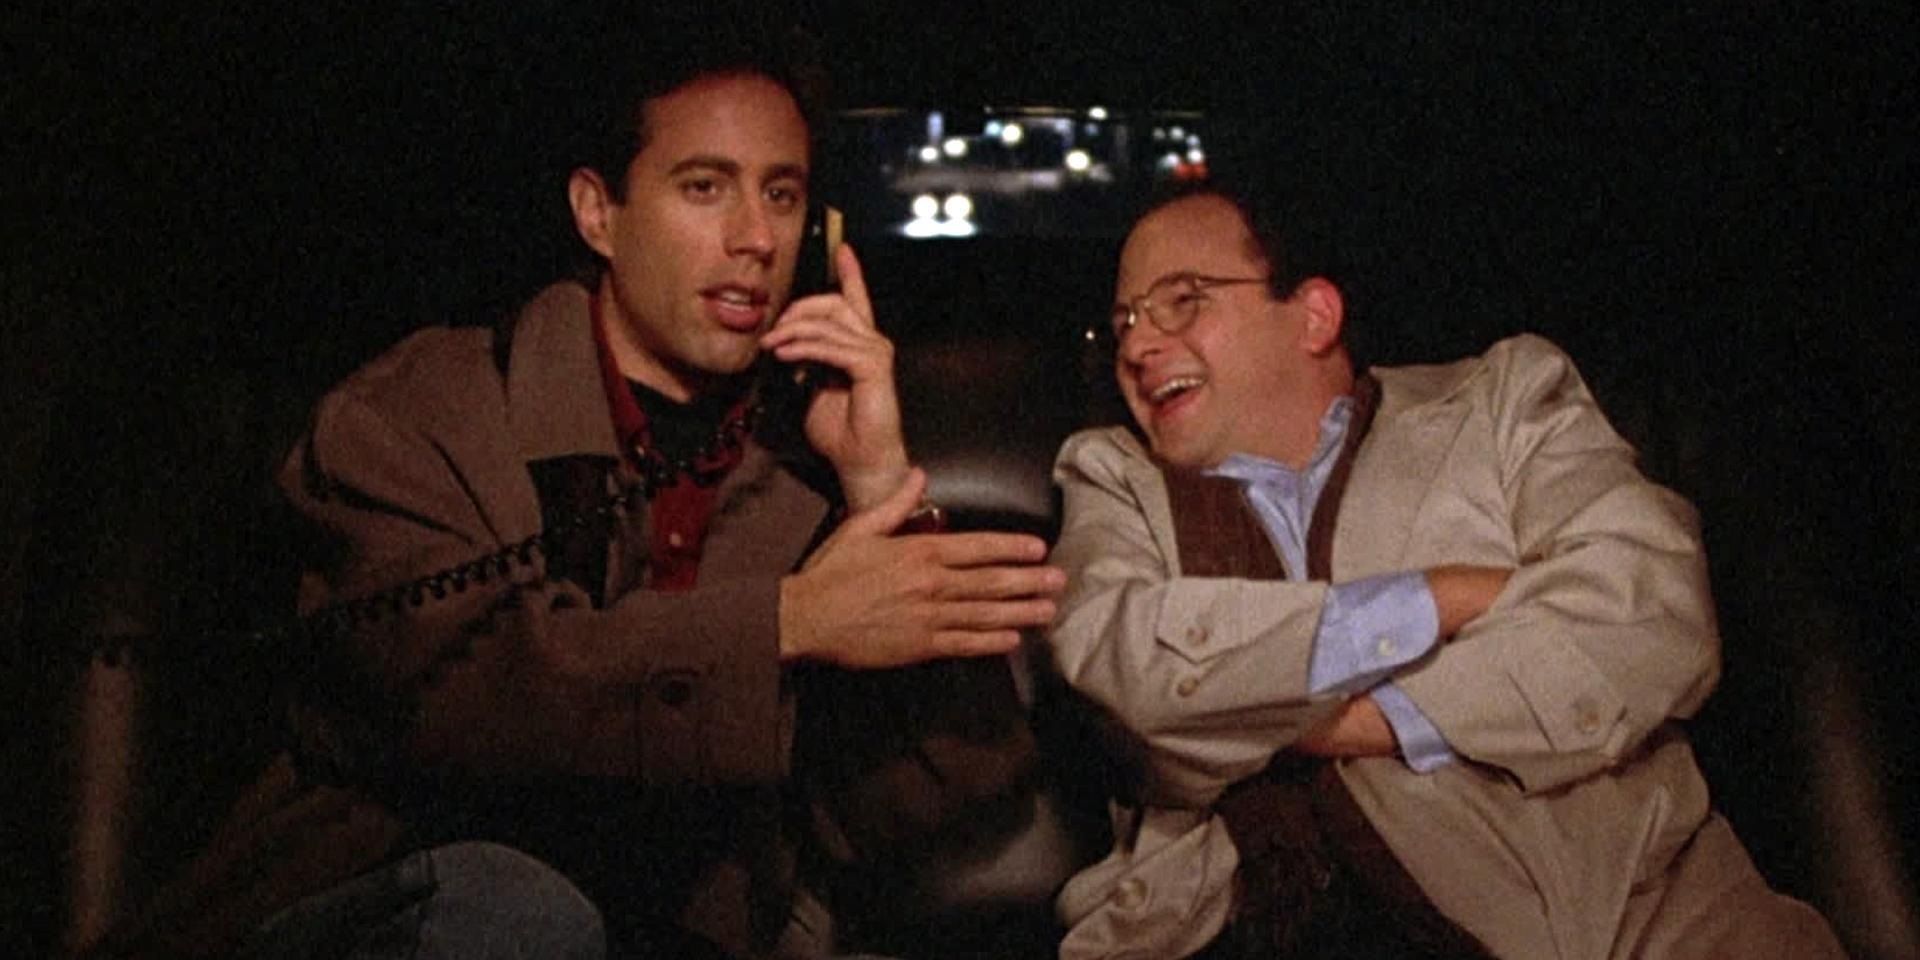 George laughs as Jerry talks on the phone in a limo in Seinfeld.